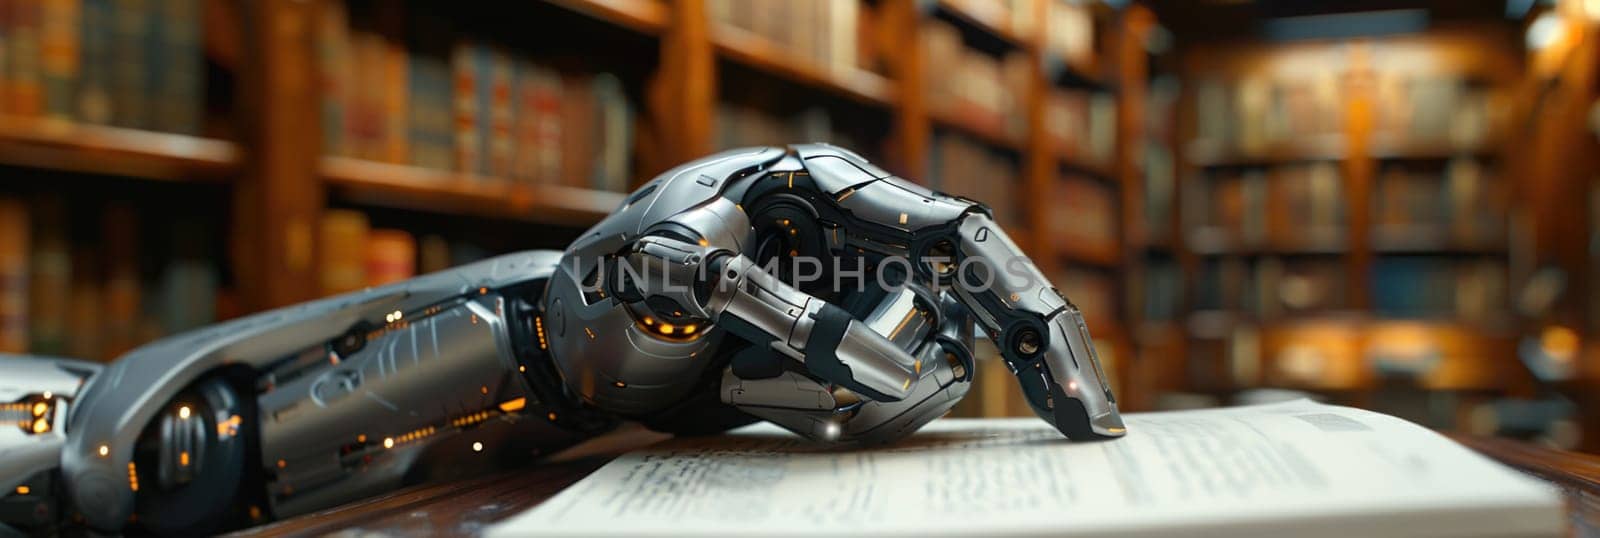 A robotic hand placed on top of a book in a library setting, showcasing the fusion of technology and learning.